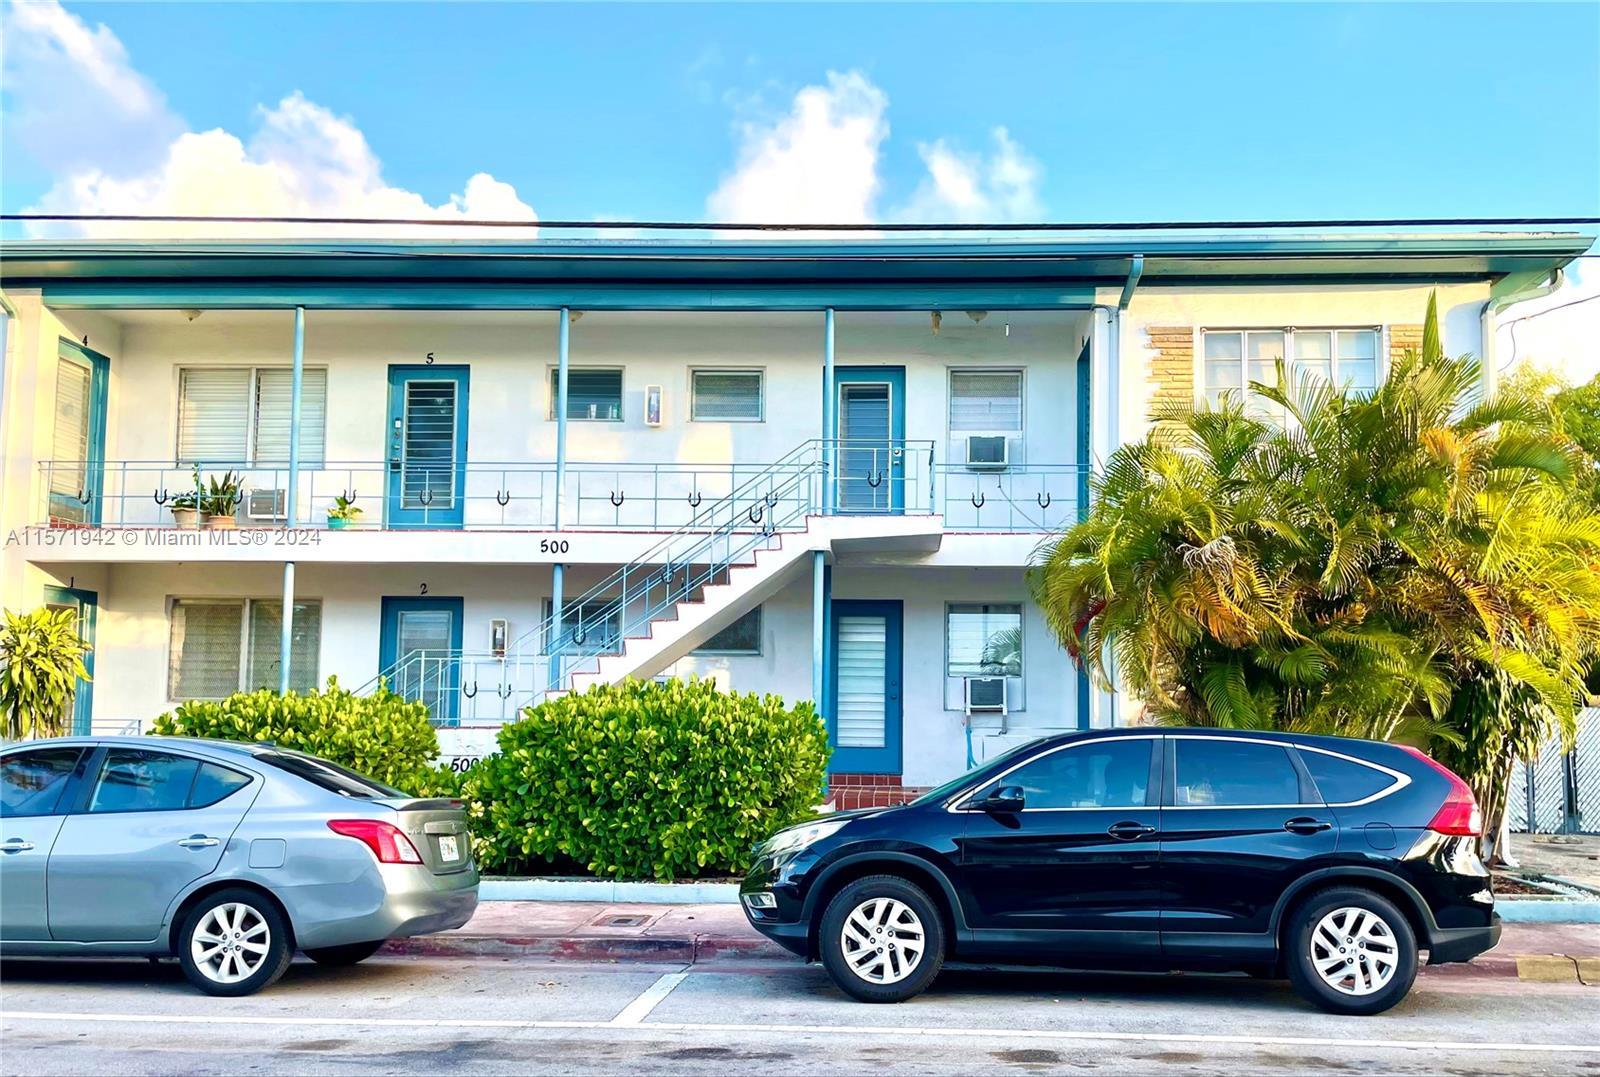 Cozy and family-friendly apartment in a quiet neighborhood of North Miami Beach. Strong rental deman